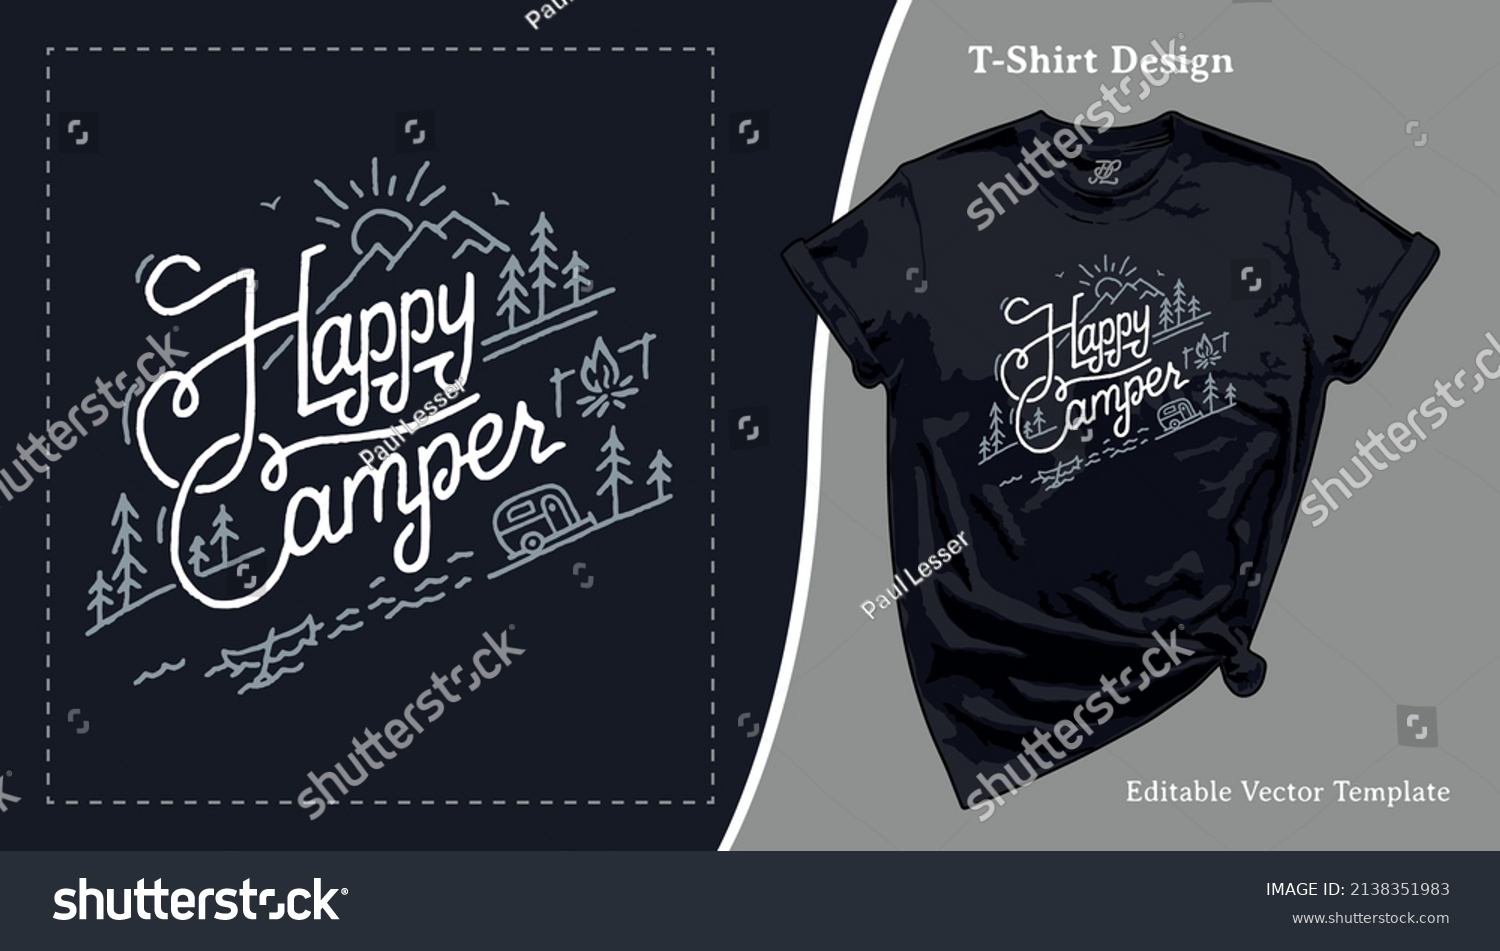 SVG of Happy Camper T-Shirt Design. T shirt Template with a Hand Drawn Vector Illustration for Print on Demand Camping Tee, Hiking Apparel, Clothing, SVG and Screen Print svg